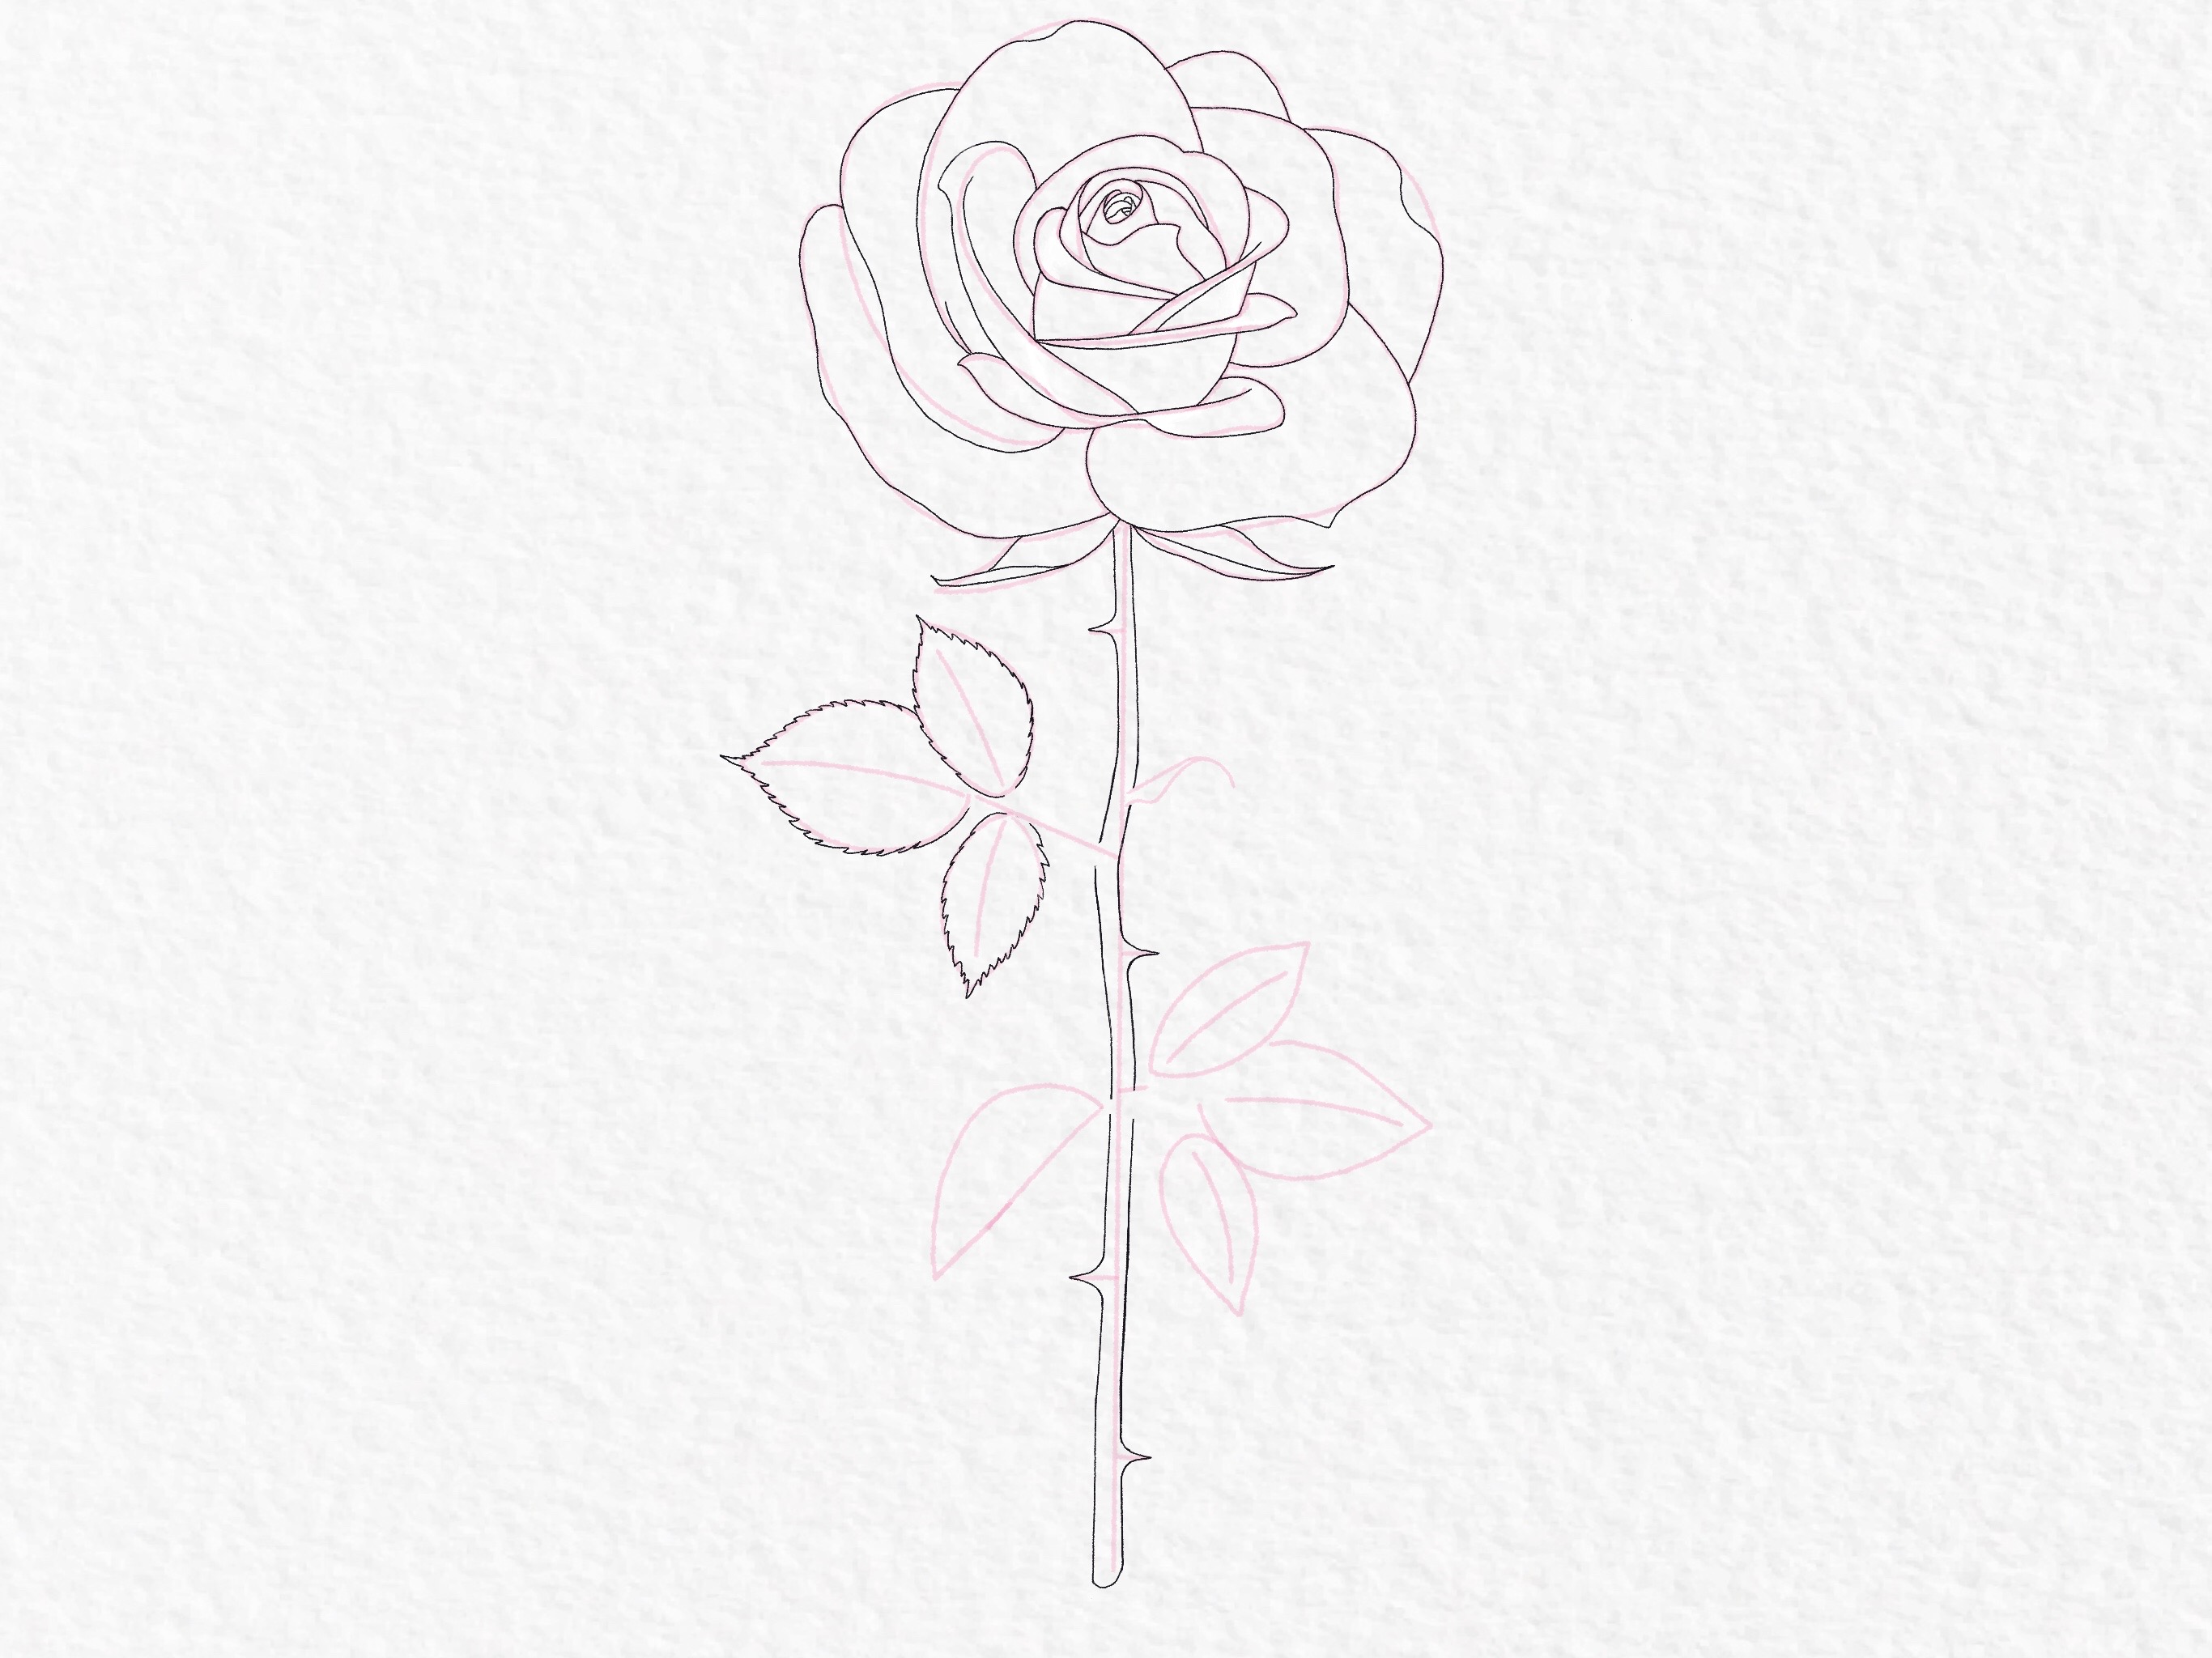 How to draw a rose, step by step drawing tutorial - step 35